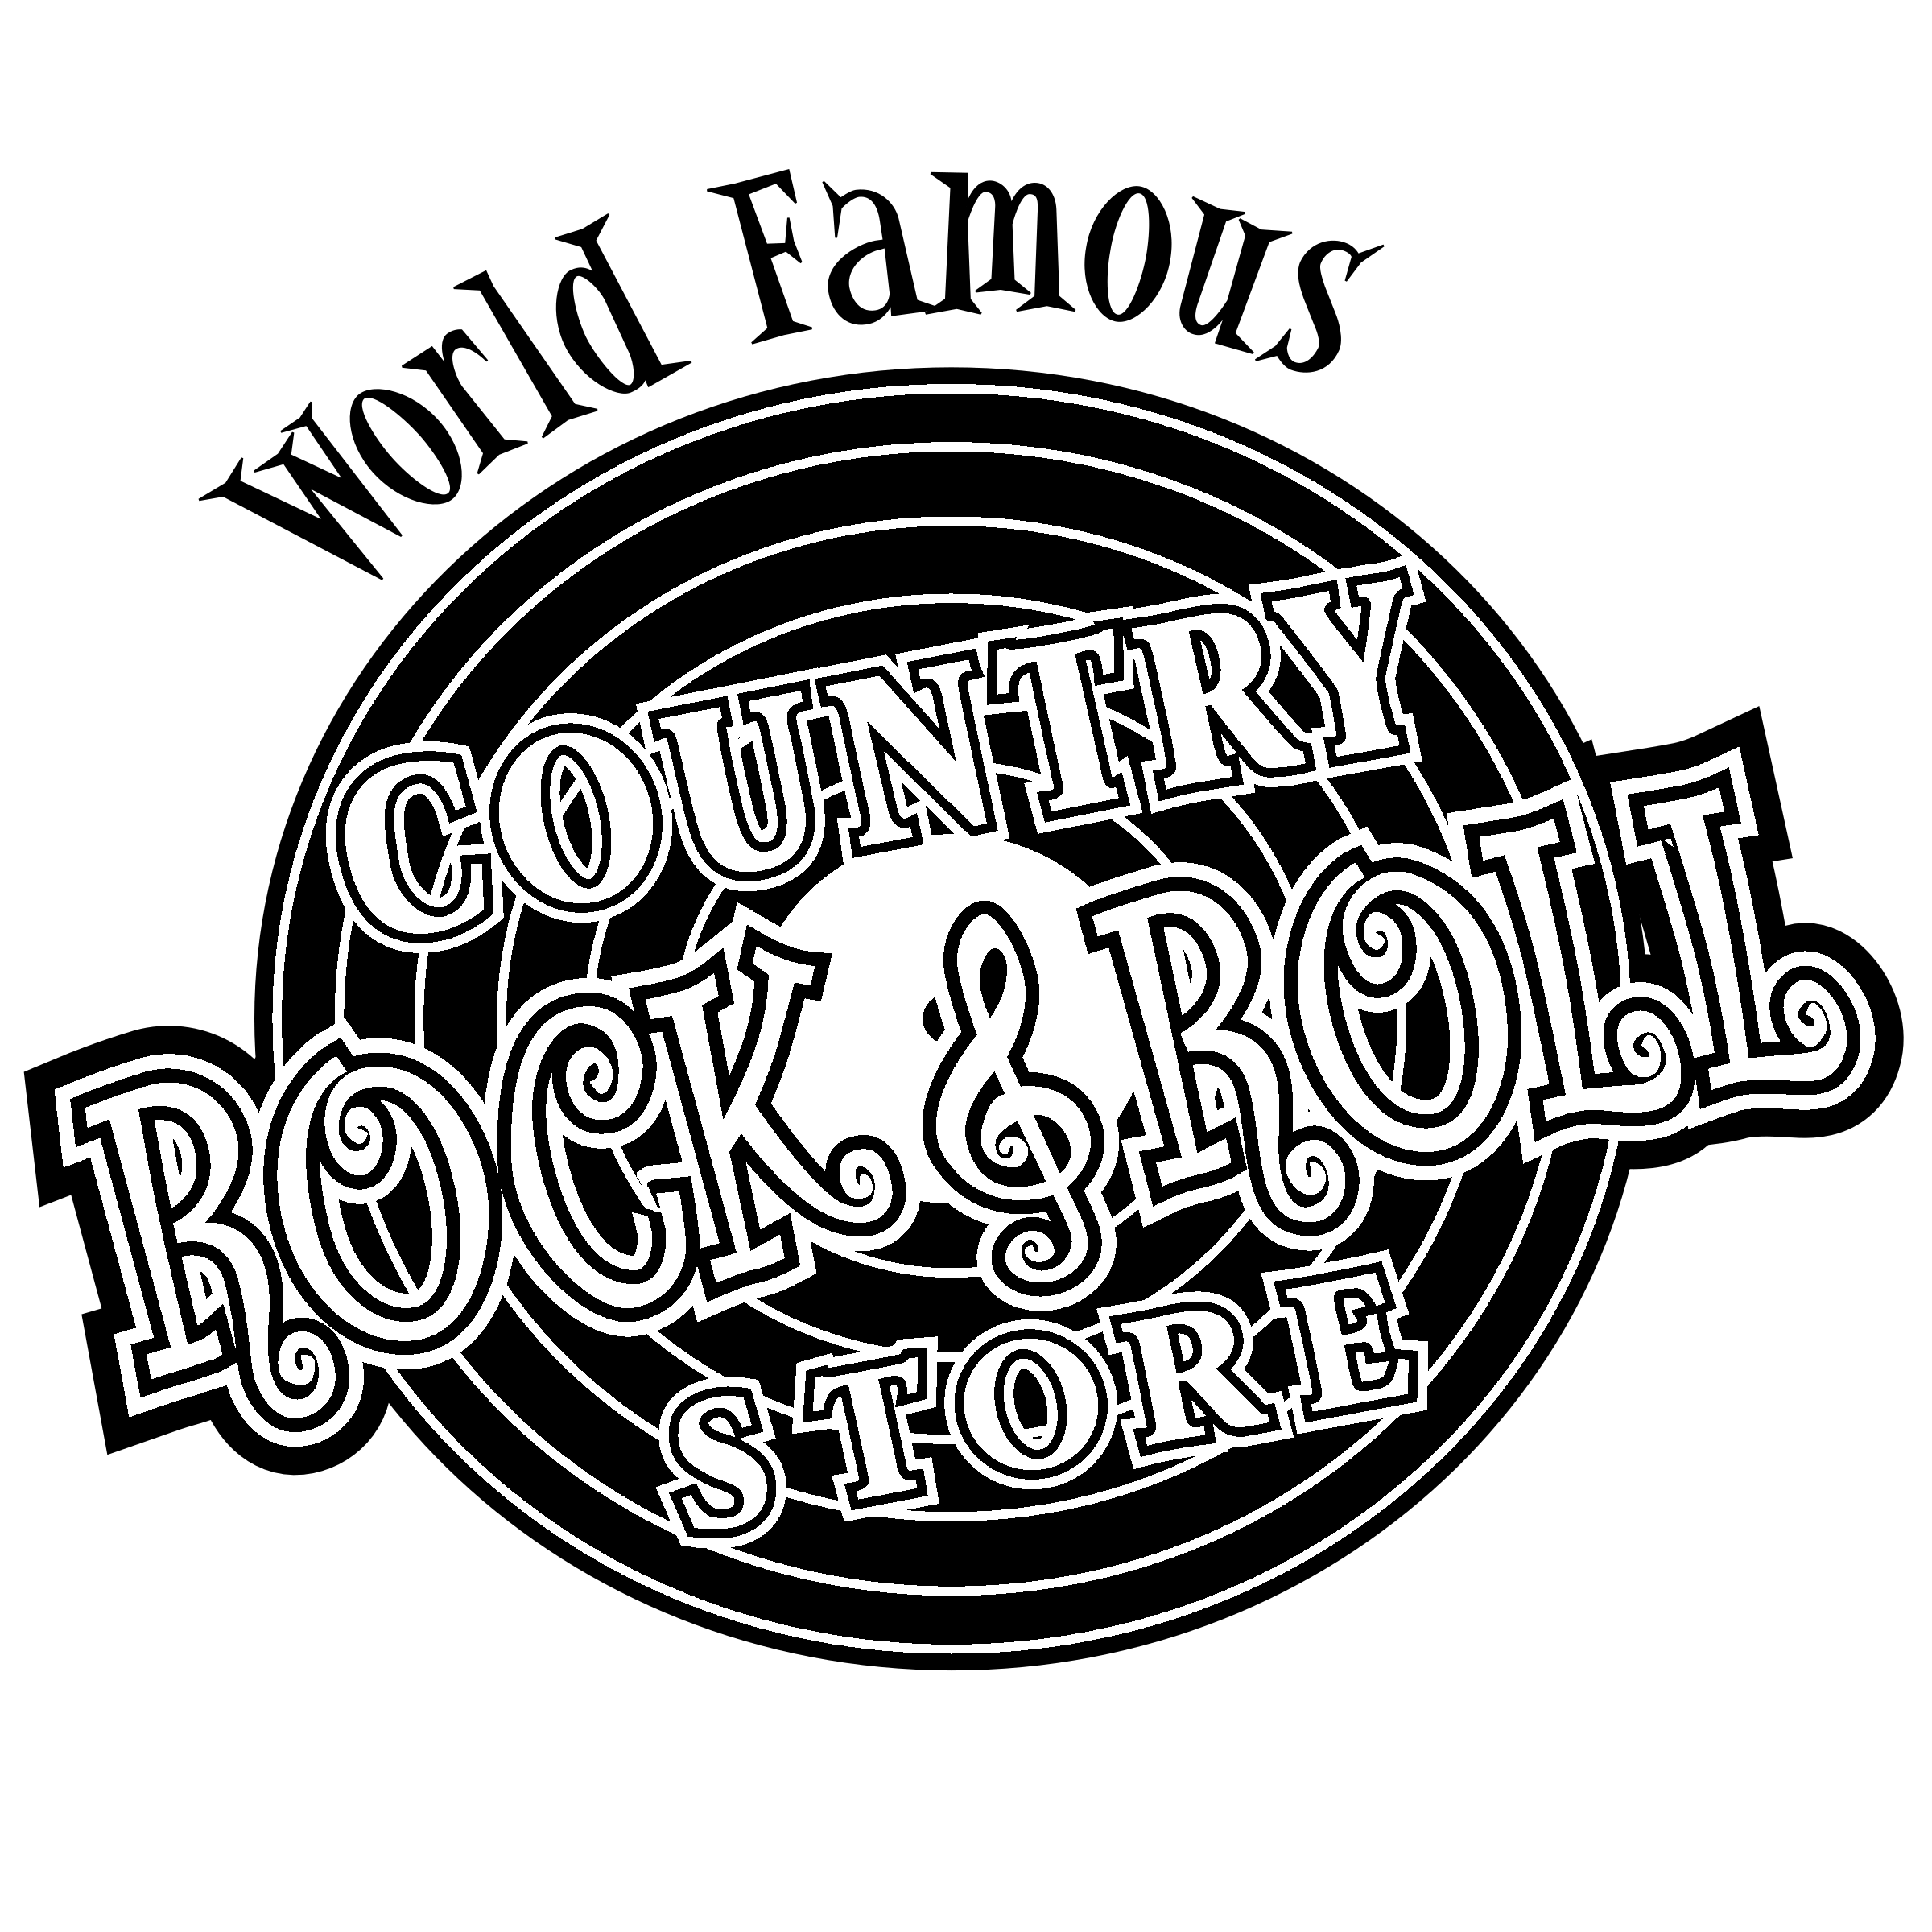 Famous Black and White Store Logo - Country Rock n Roll Store Logo PNG Transparent & SVG Vector ...